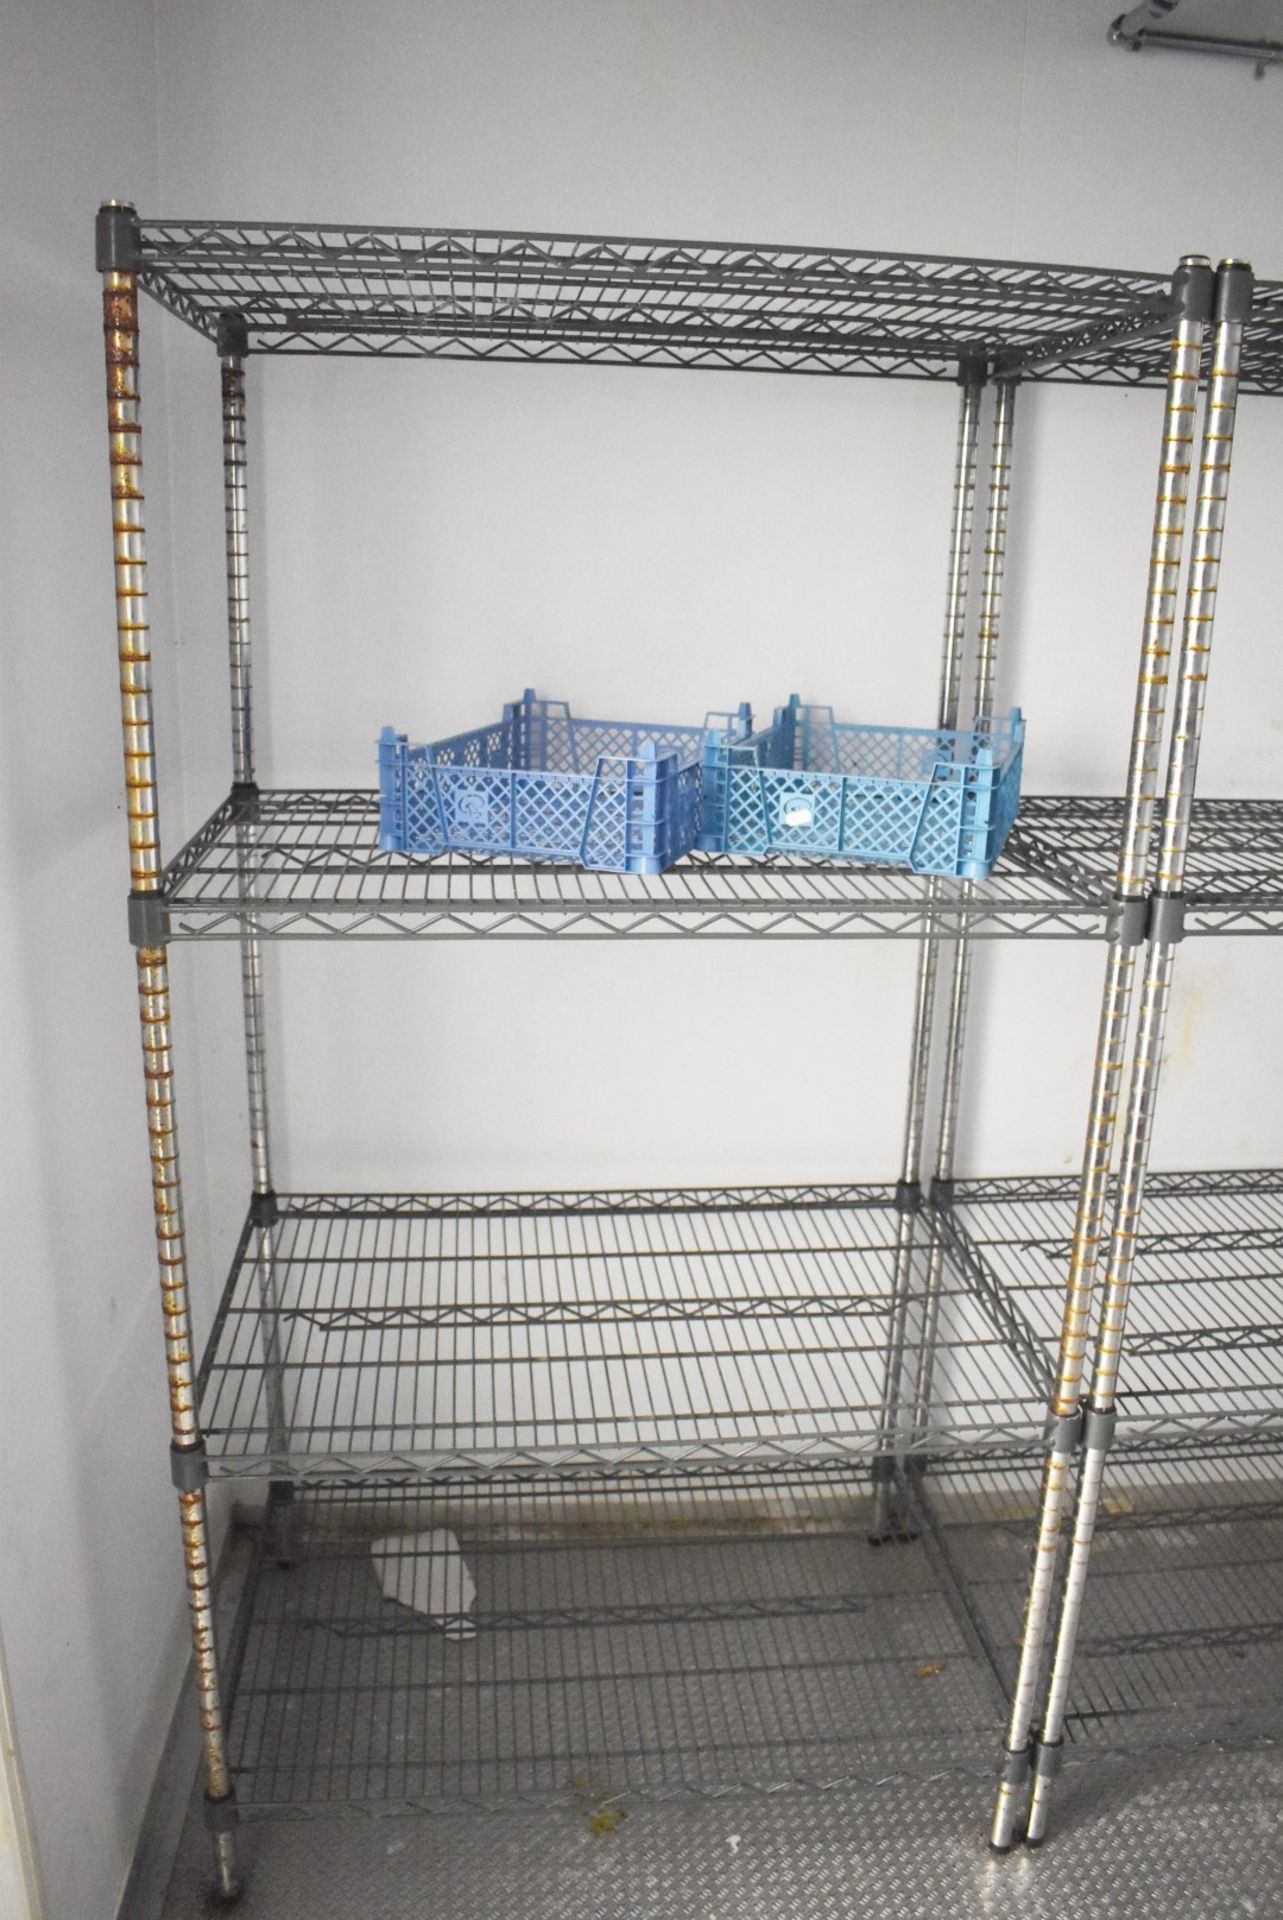 5 x Assorted Cold Room Wire Storage Shelf Units With Coated Shelves - H168 x W90-124 x D60 cms - Image 3 of 9